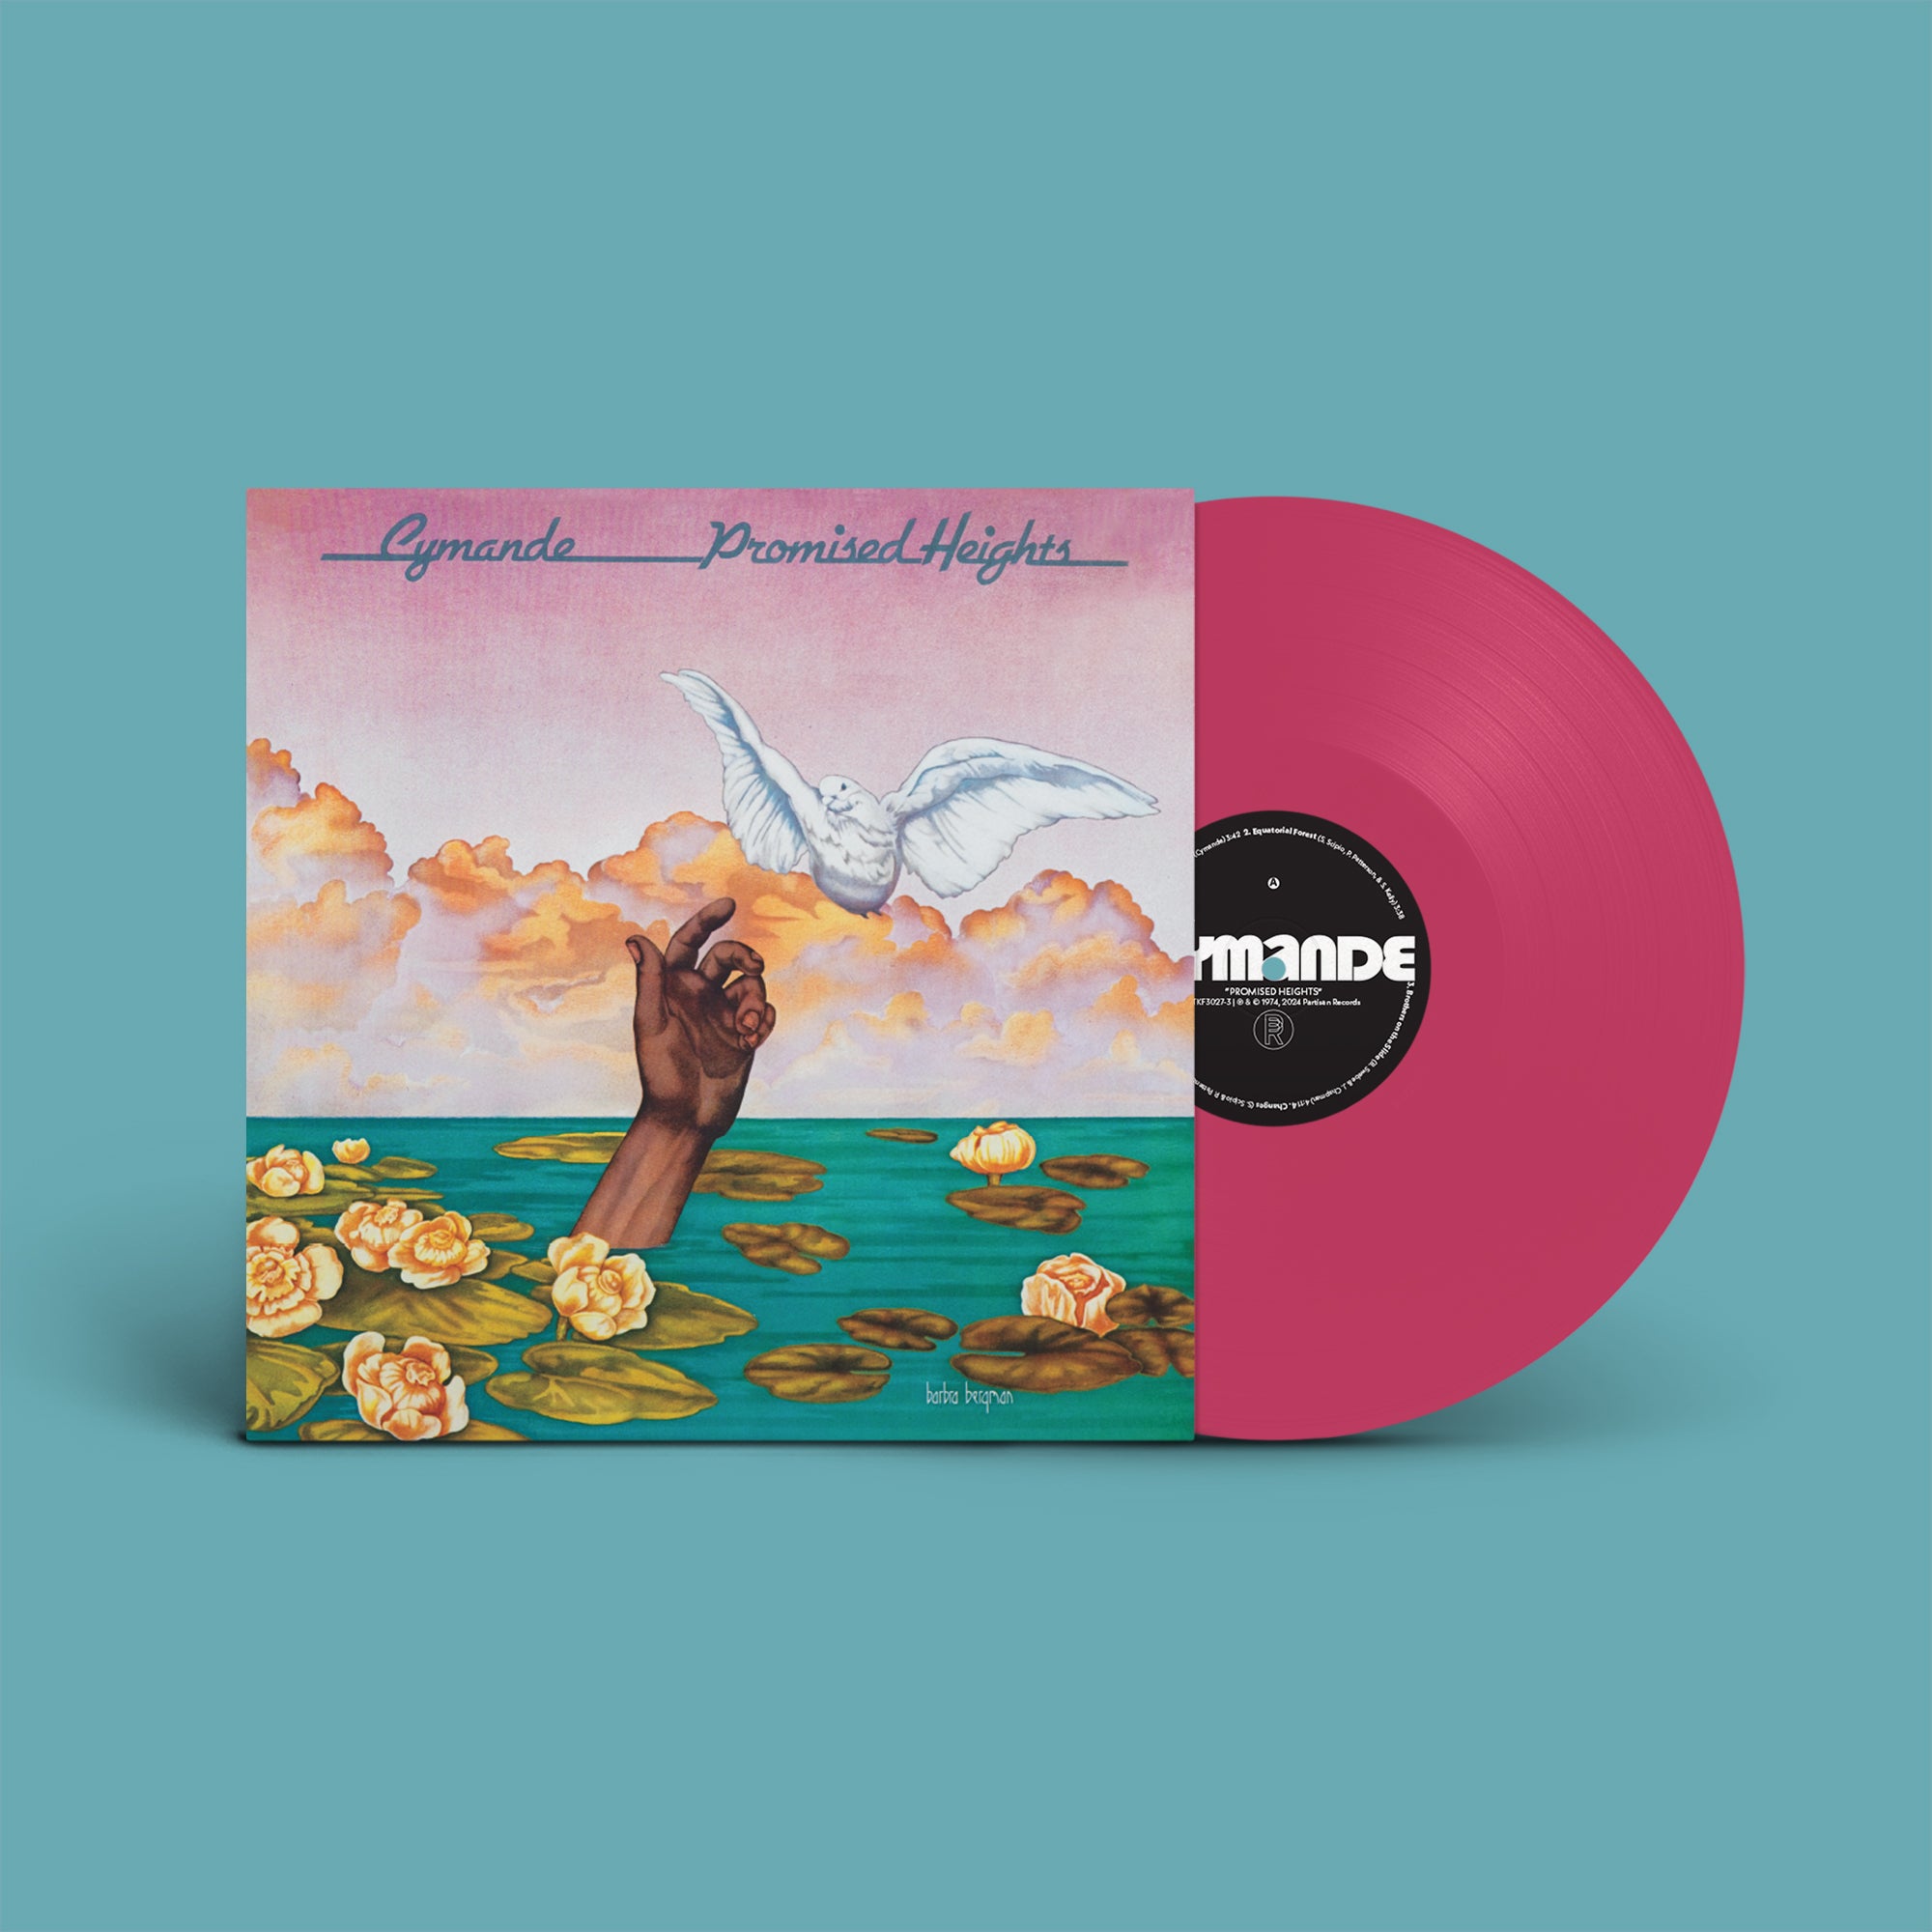 Cymande - Promised Heights: Limited Opaque Pink Vinyl LP